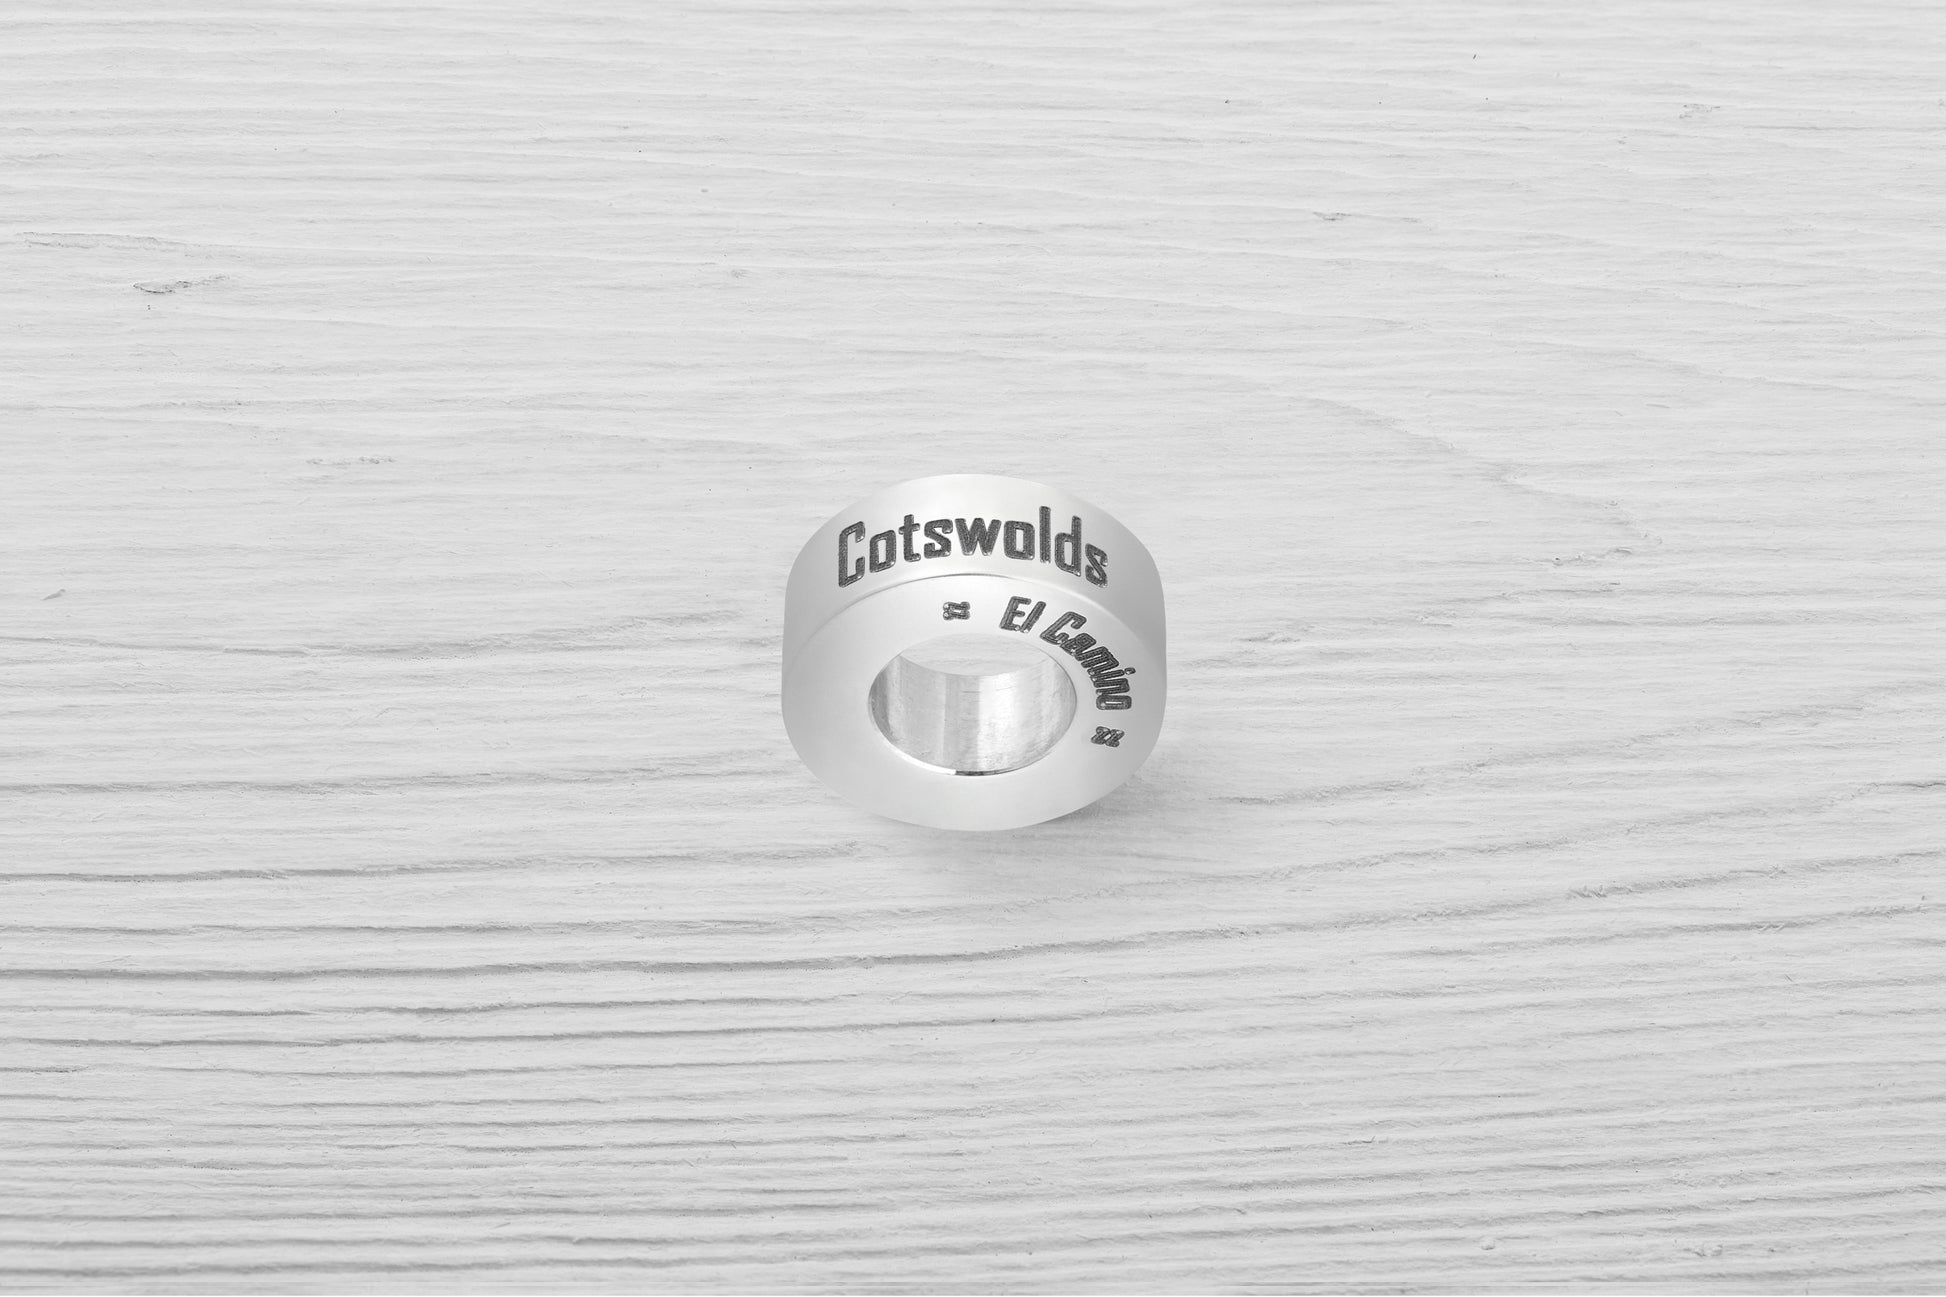 Cotswolds El Camino Small Step Travel Charm Bead